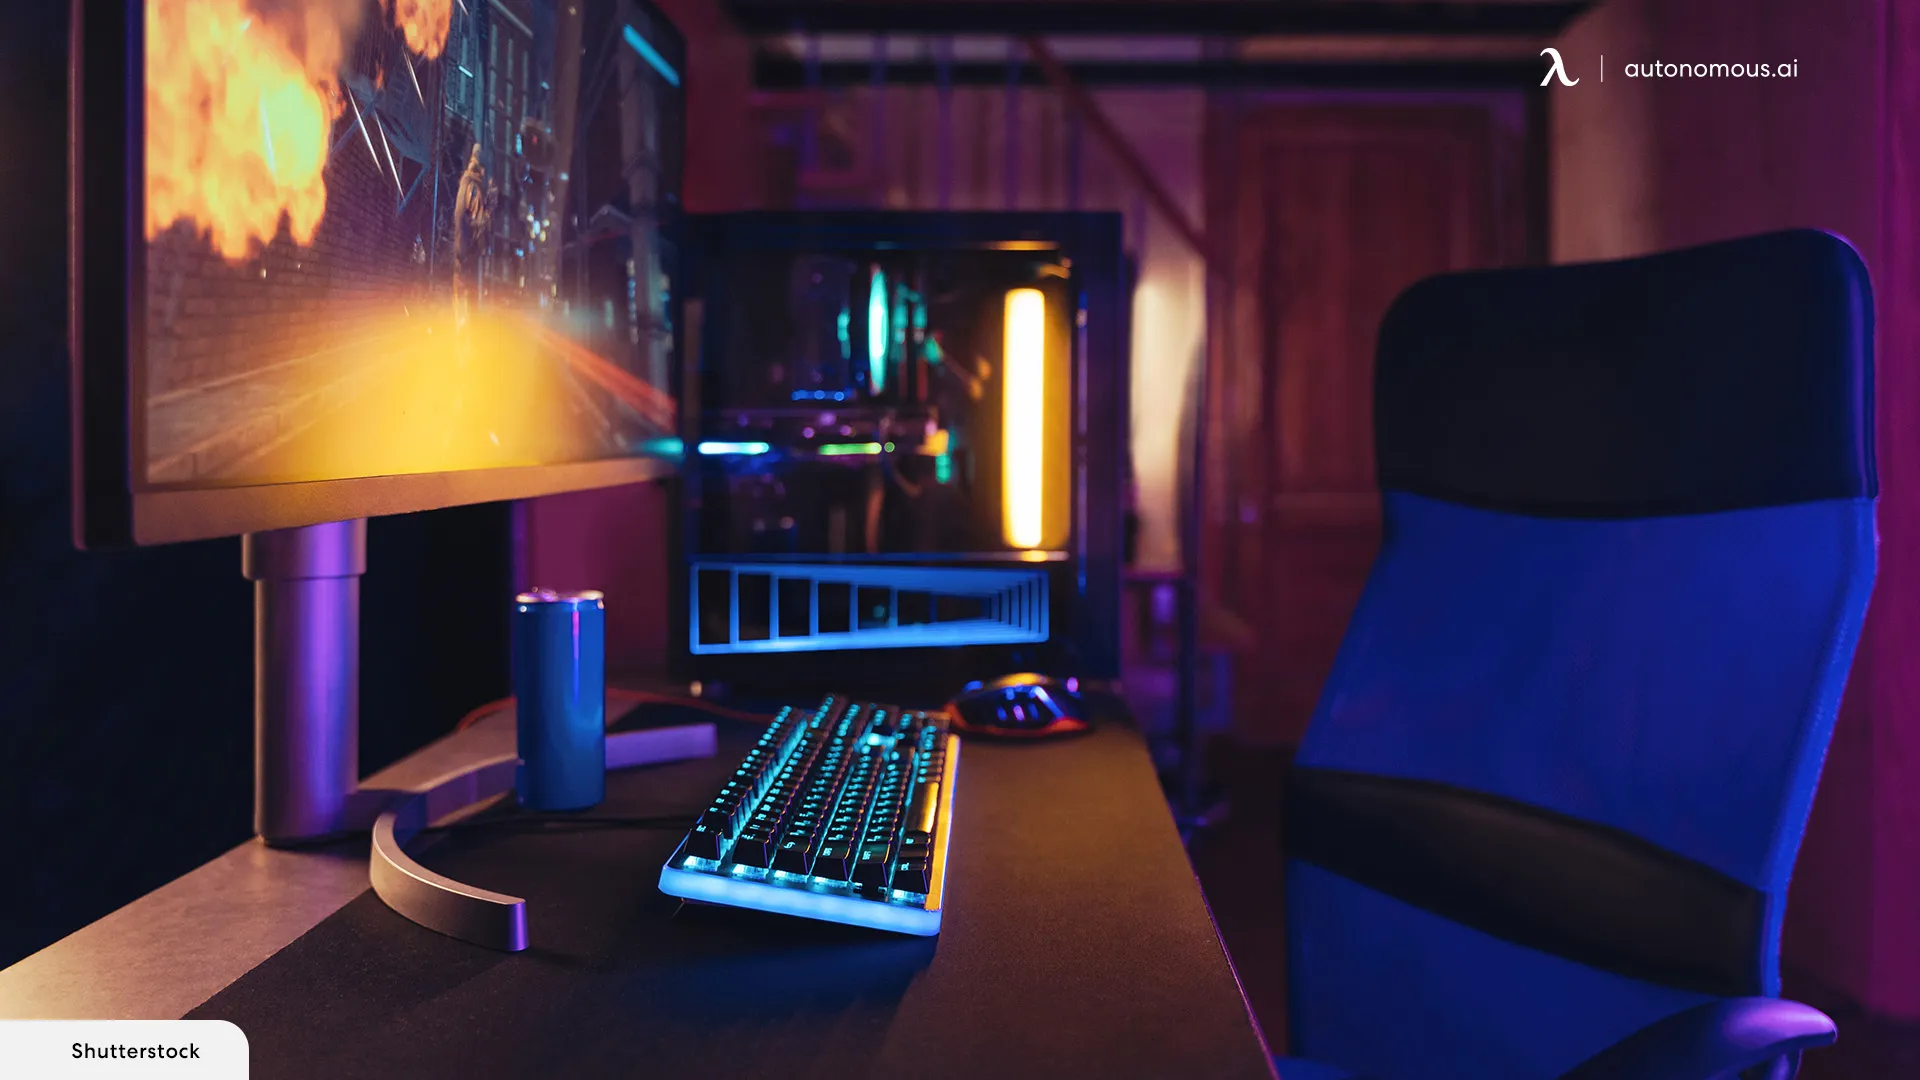 Personalization: man cave gaming room